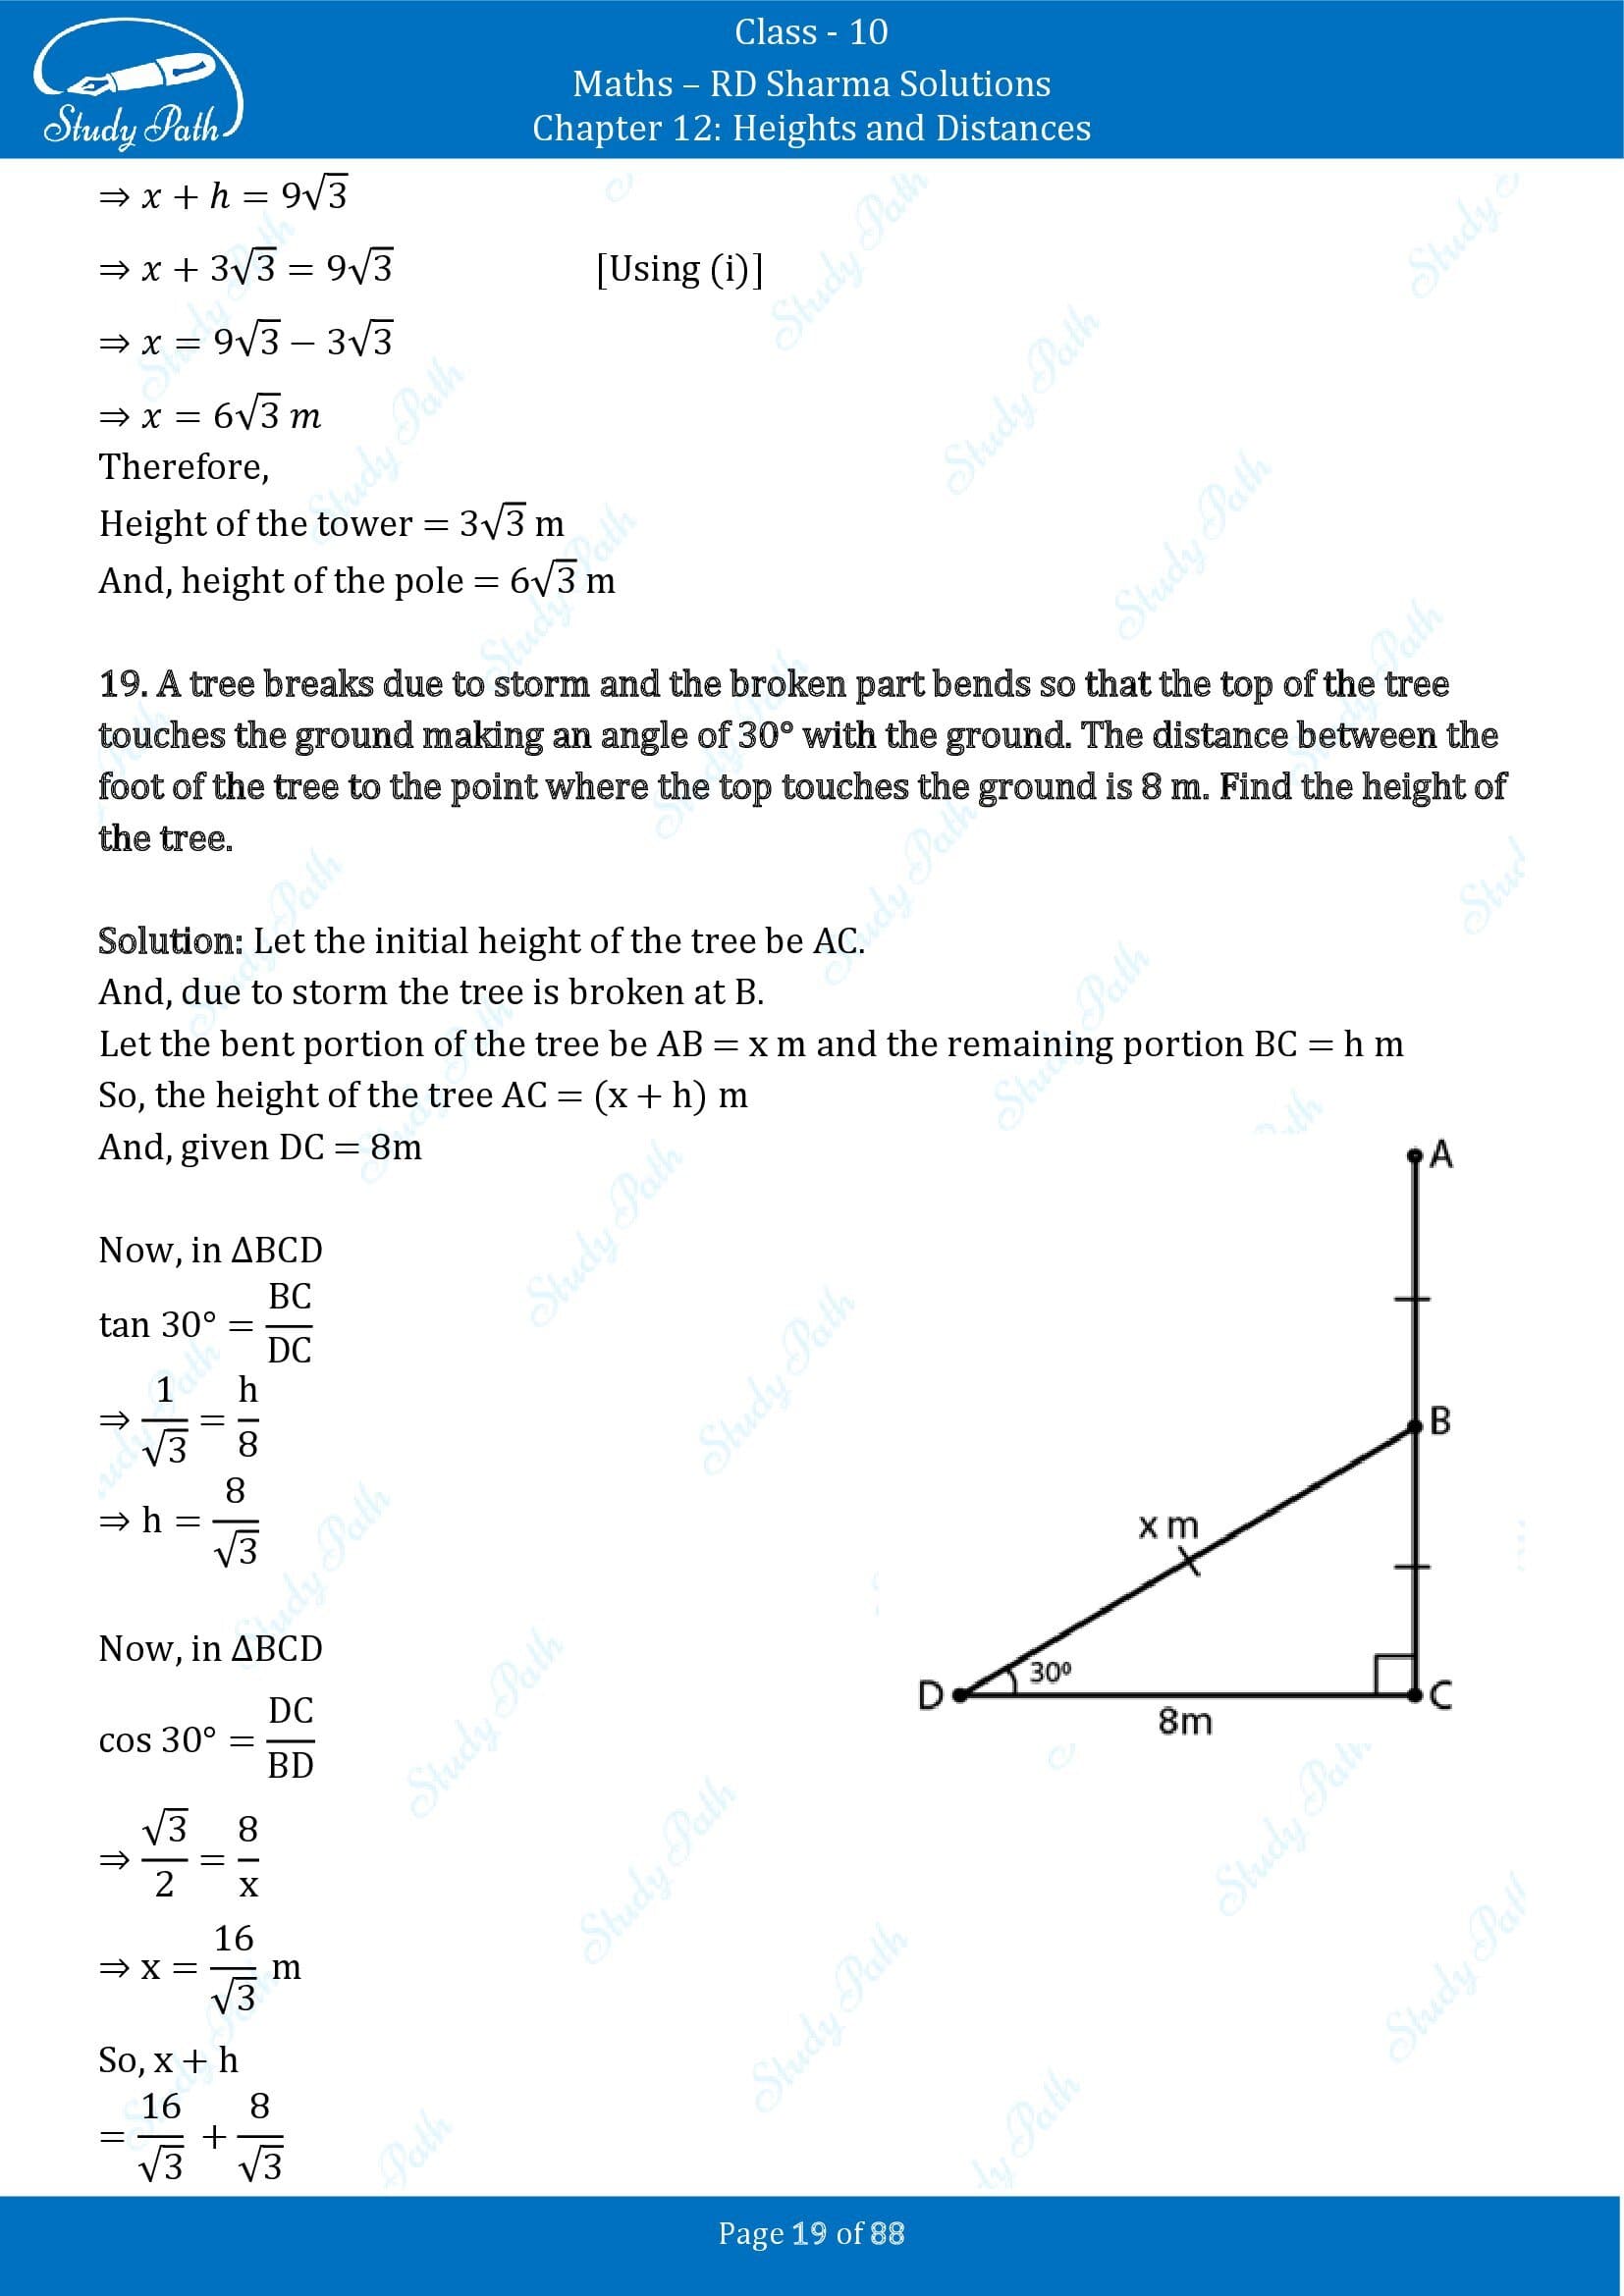 RD Sharma Solutions Class 10 Chapter 12 Heights and Distances Exercise 12.1 00019